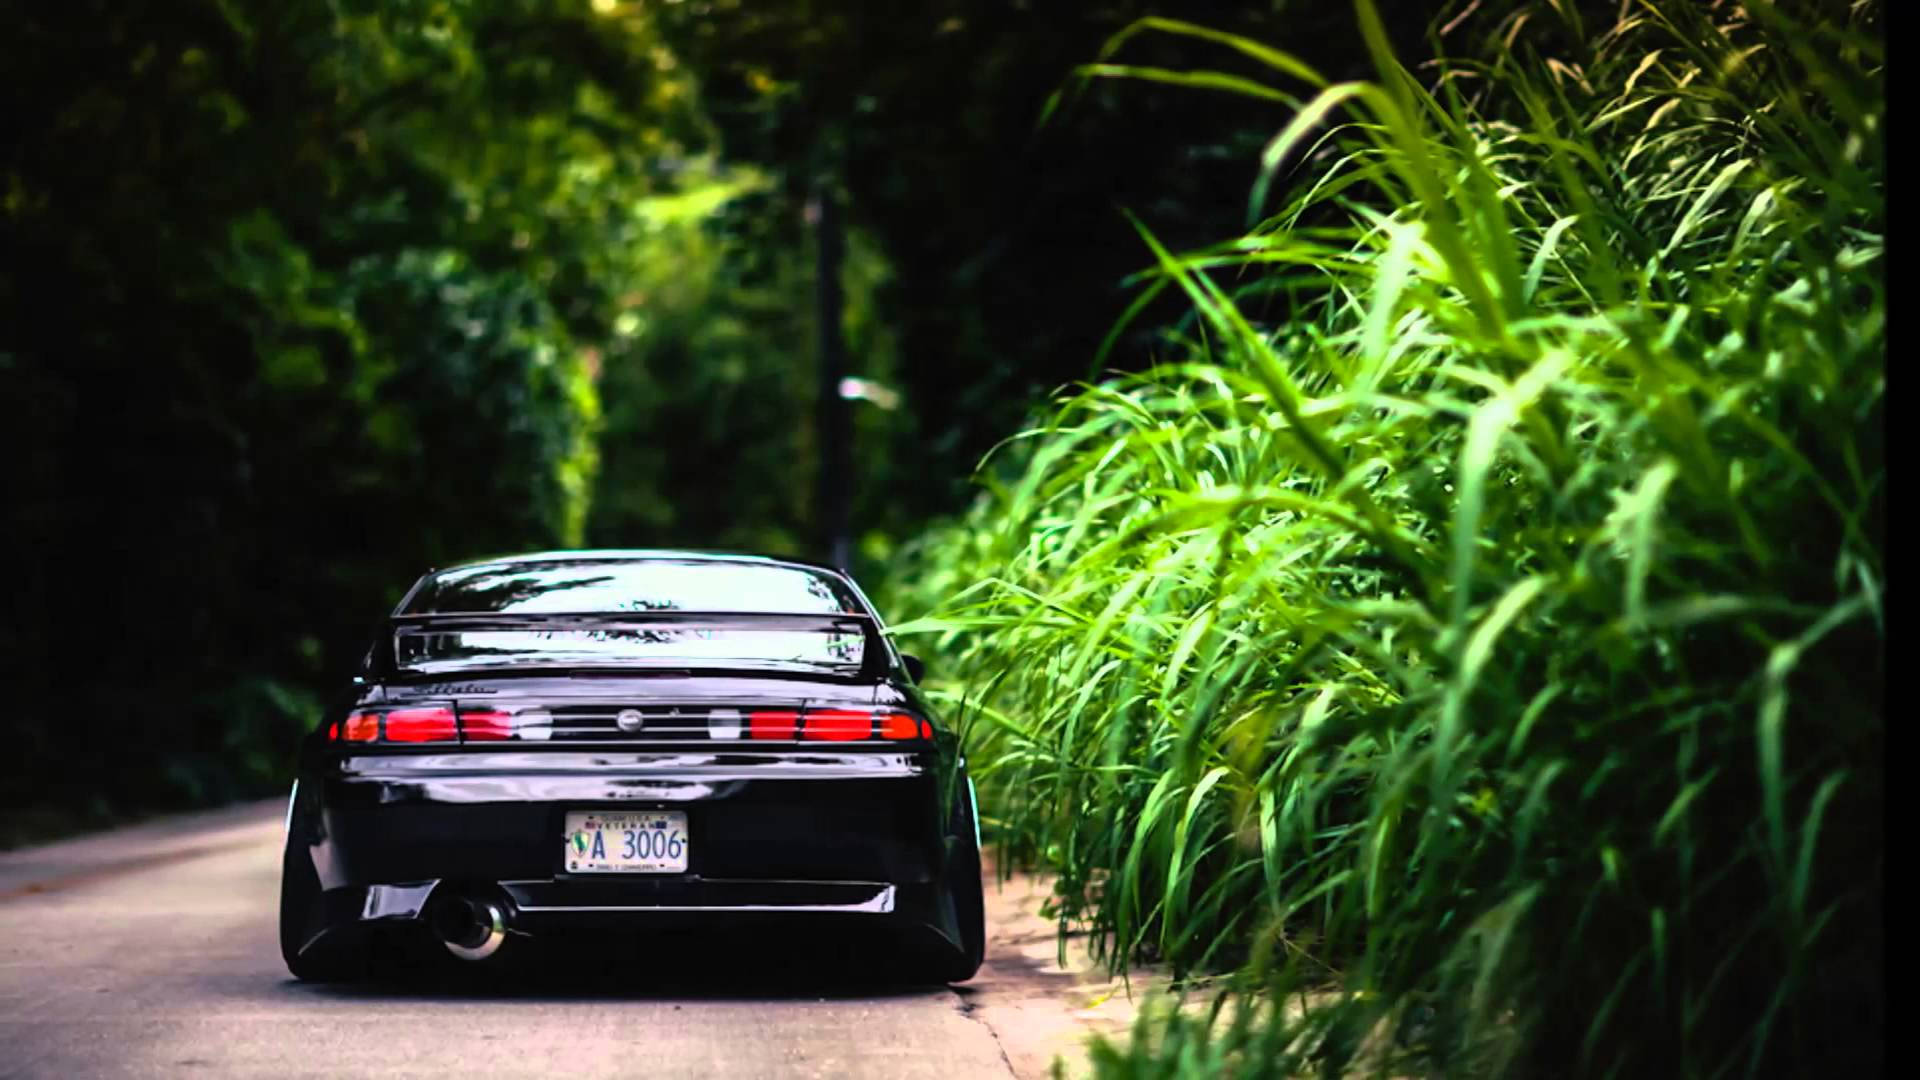 10 Nissan Silvia S14 HD Wallpapers and Backgrounds